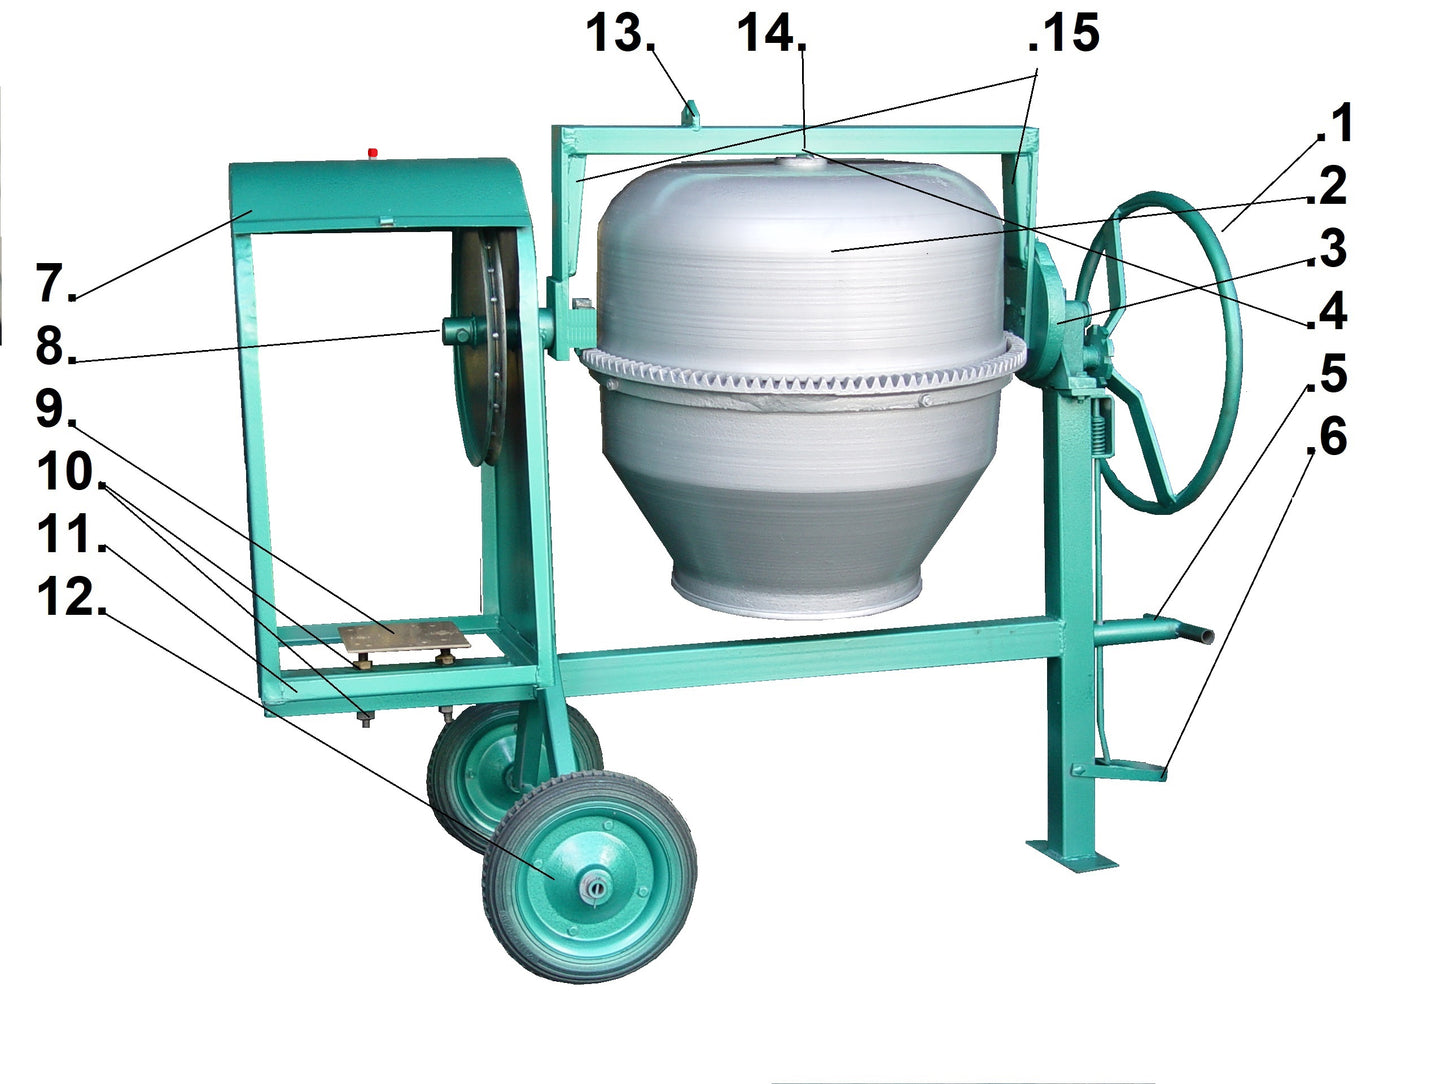 Concrete mixer 1/2 bag with Electric motor 2 Hp